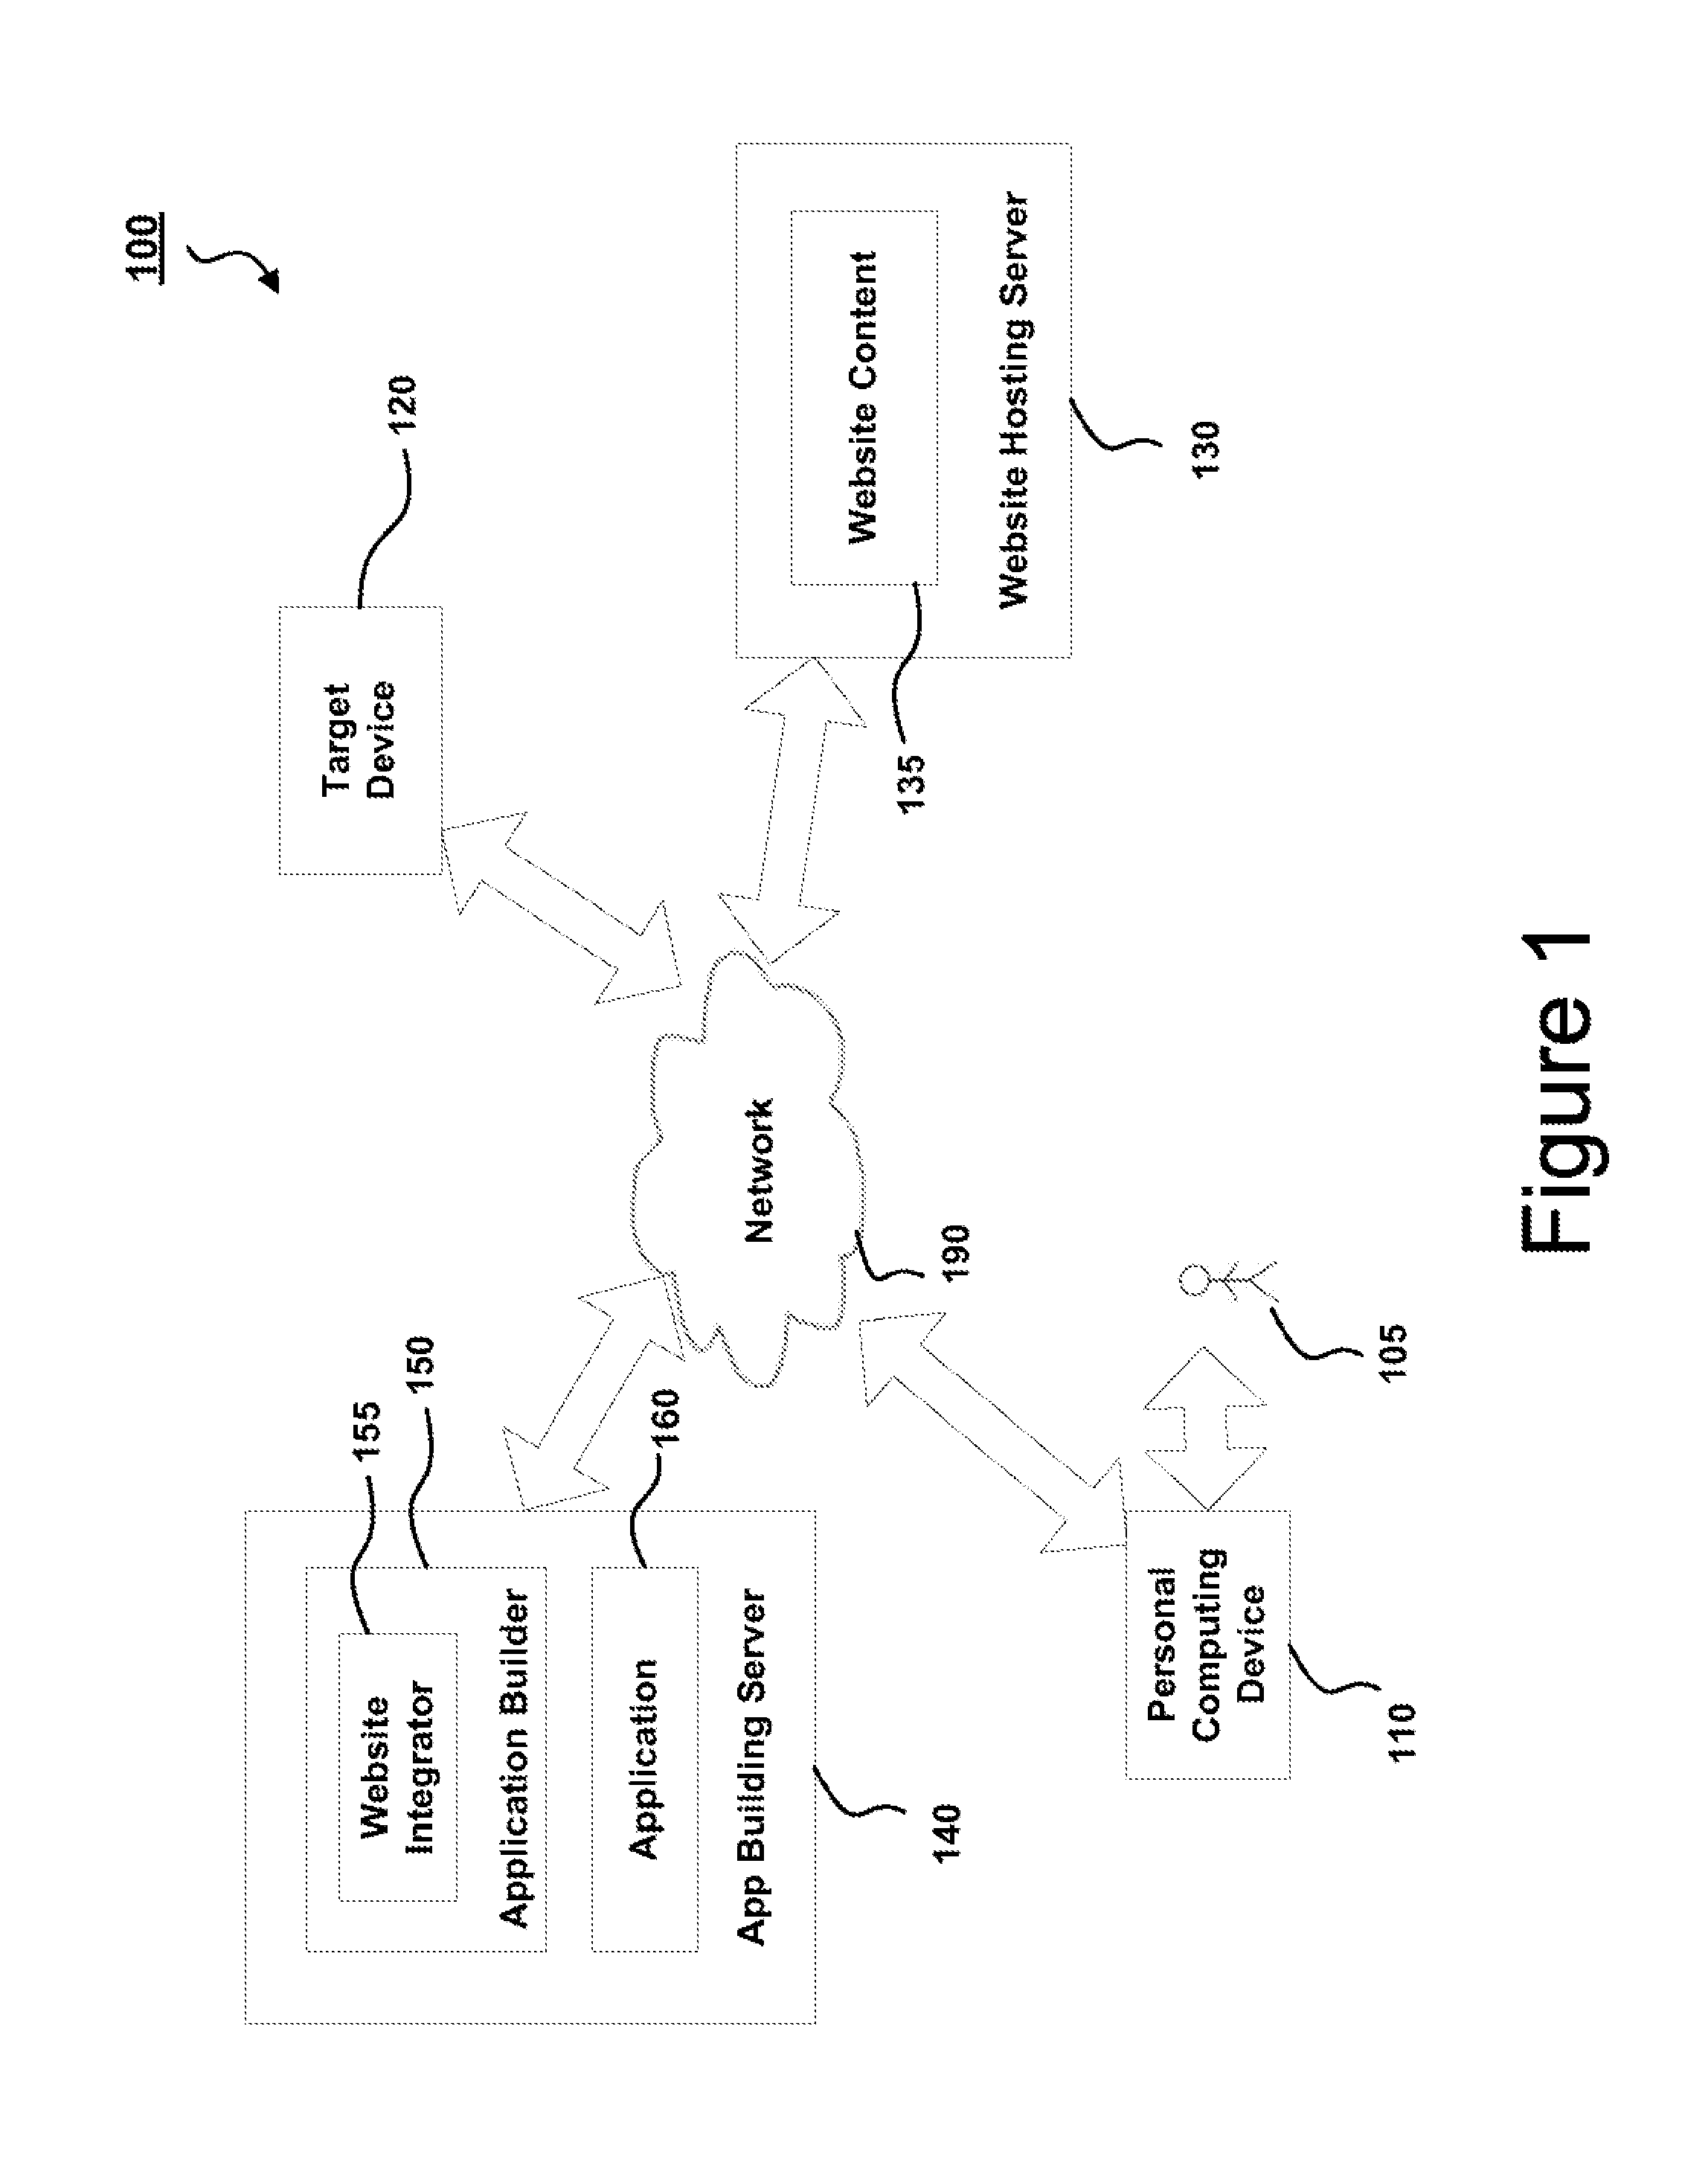 Systems and methods for creating or updating an application using website content